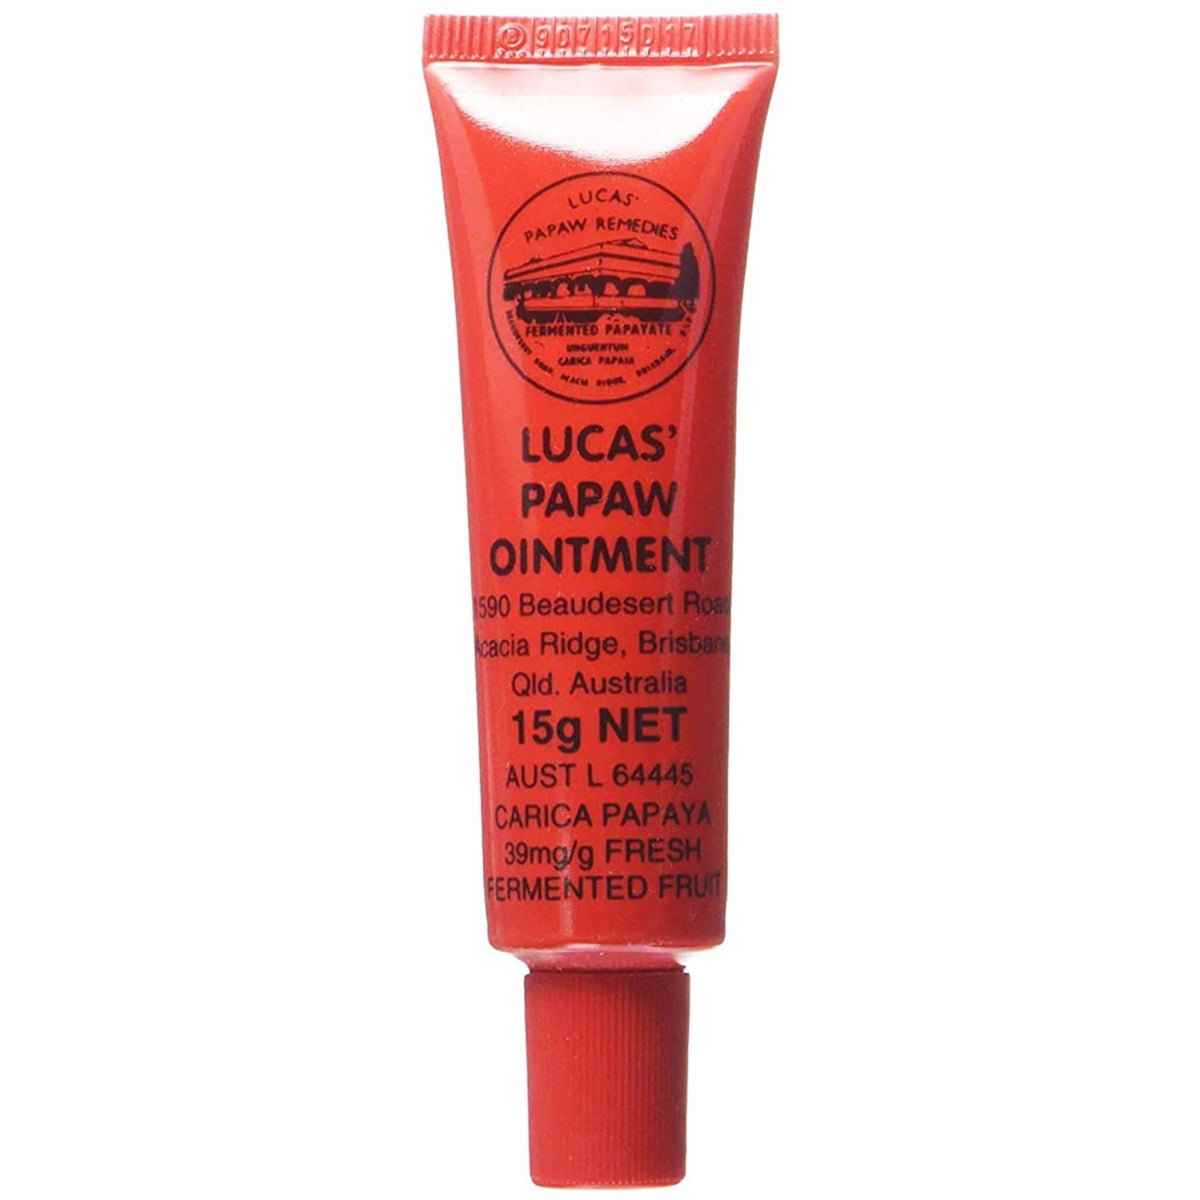 Lucas Papaw Ointment 15g